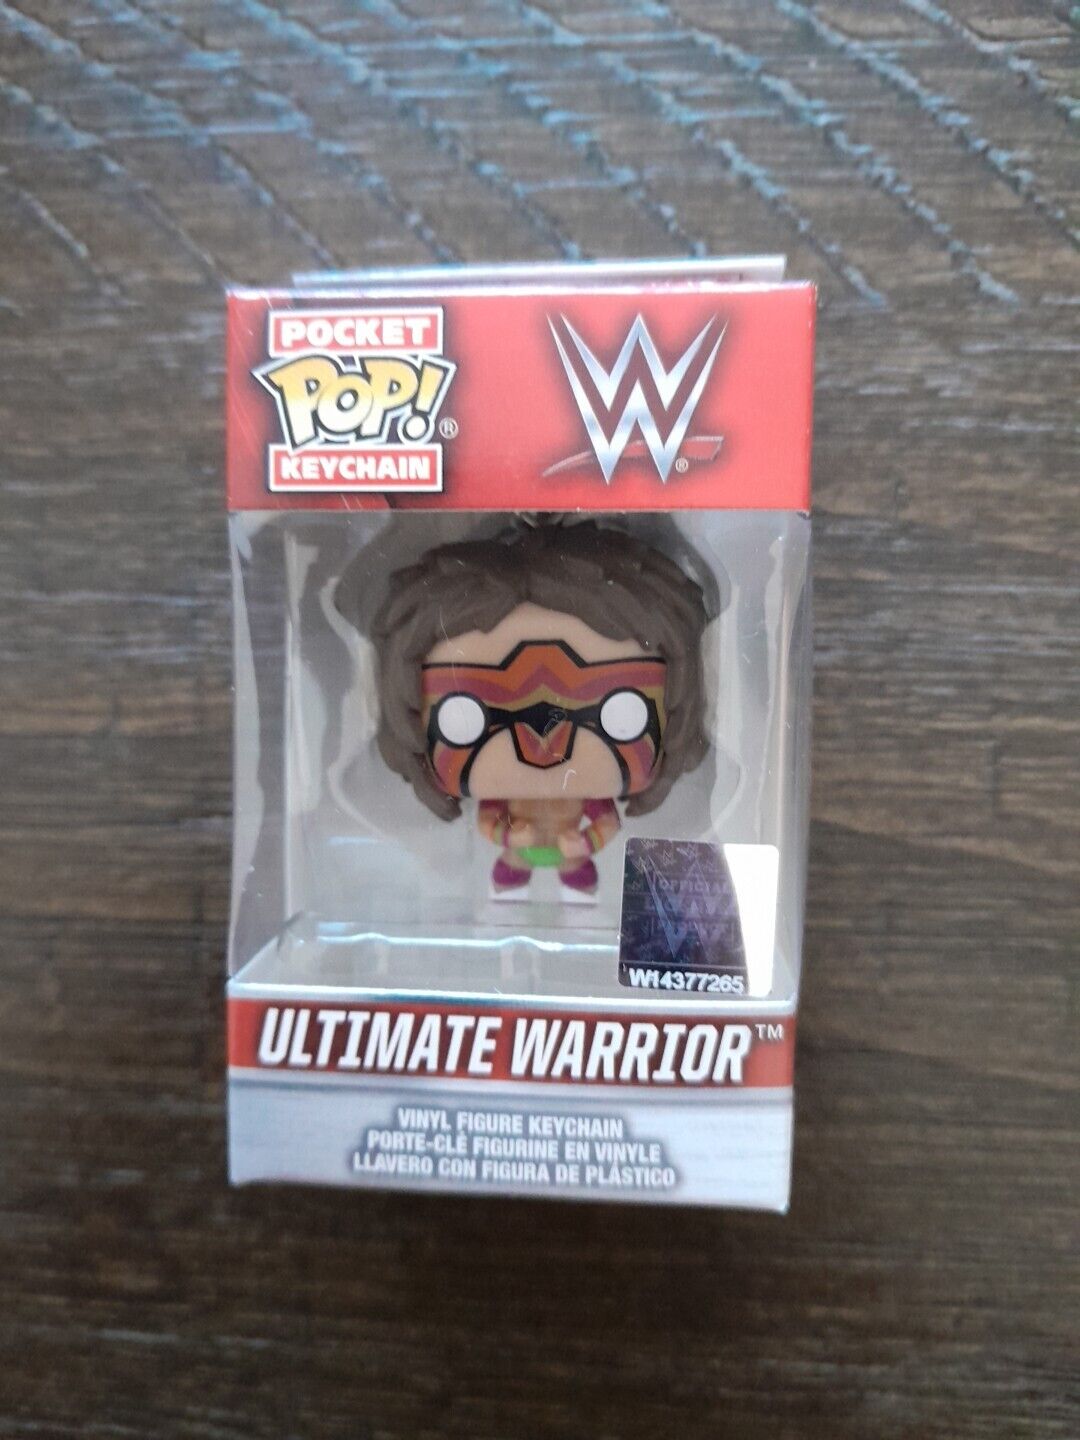 Funko Pocket Pop Keychain ULTIMATE WARRIOR Sealed NEW Box Great CONDITION WWE